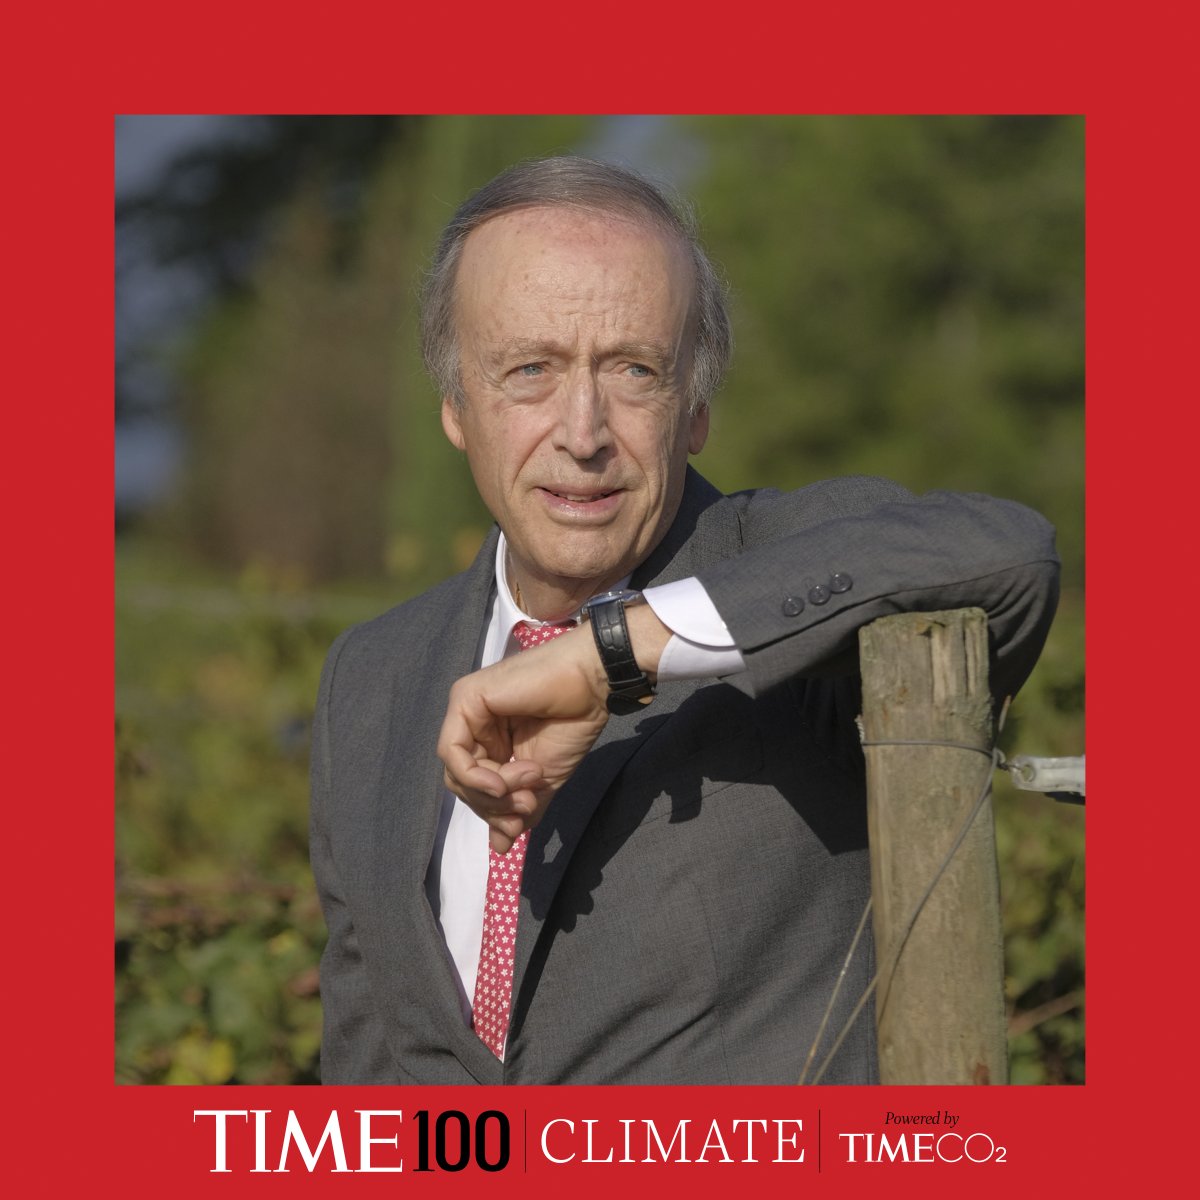 Miguel A. Torres, president of Familia Torres, has been named by @TIME magazine as one of the 100 most influential people leading climate action globally. #FamiliaTorres #TIME100Climate time.com/collection/tim…